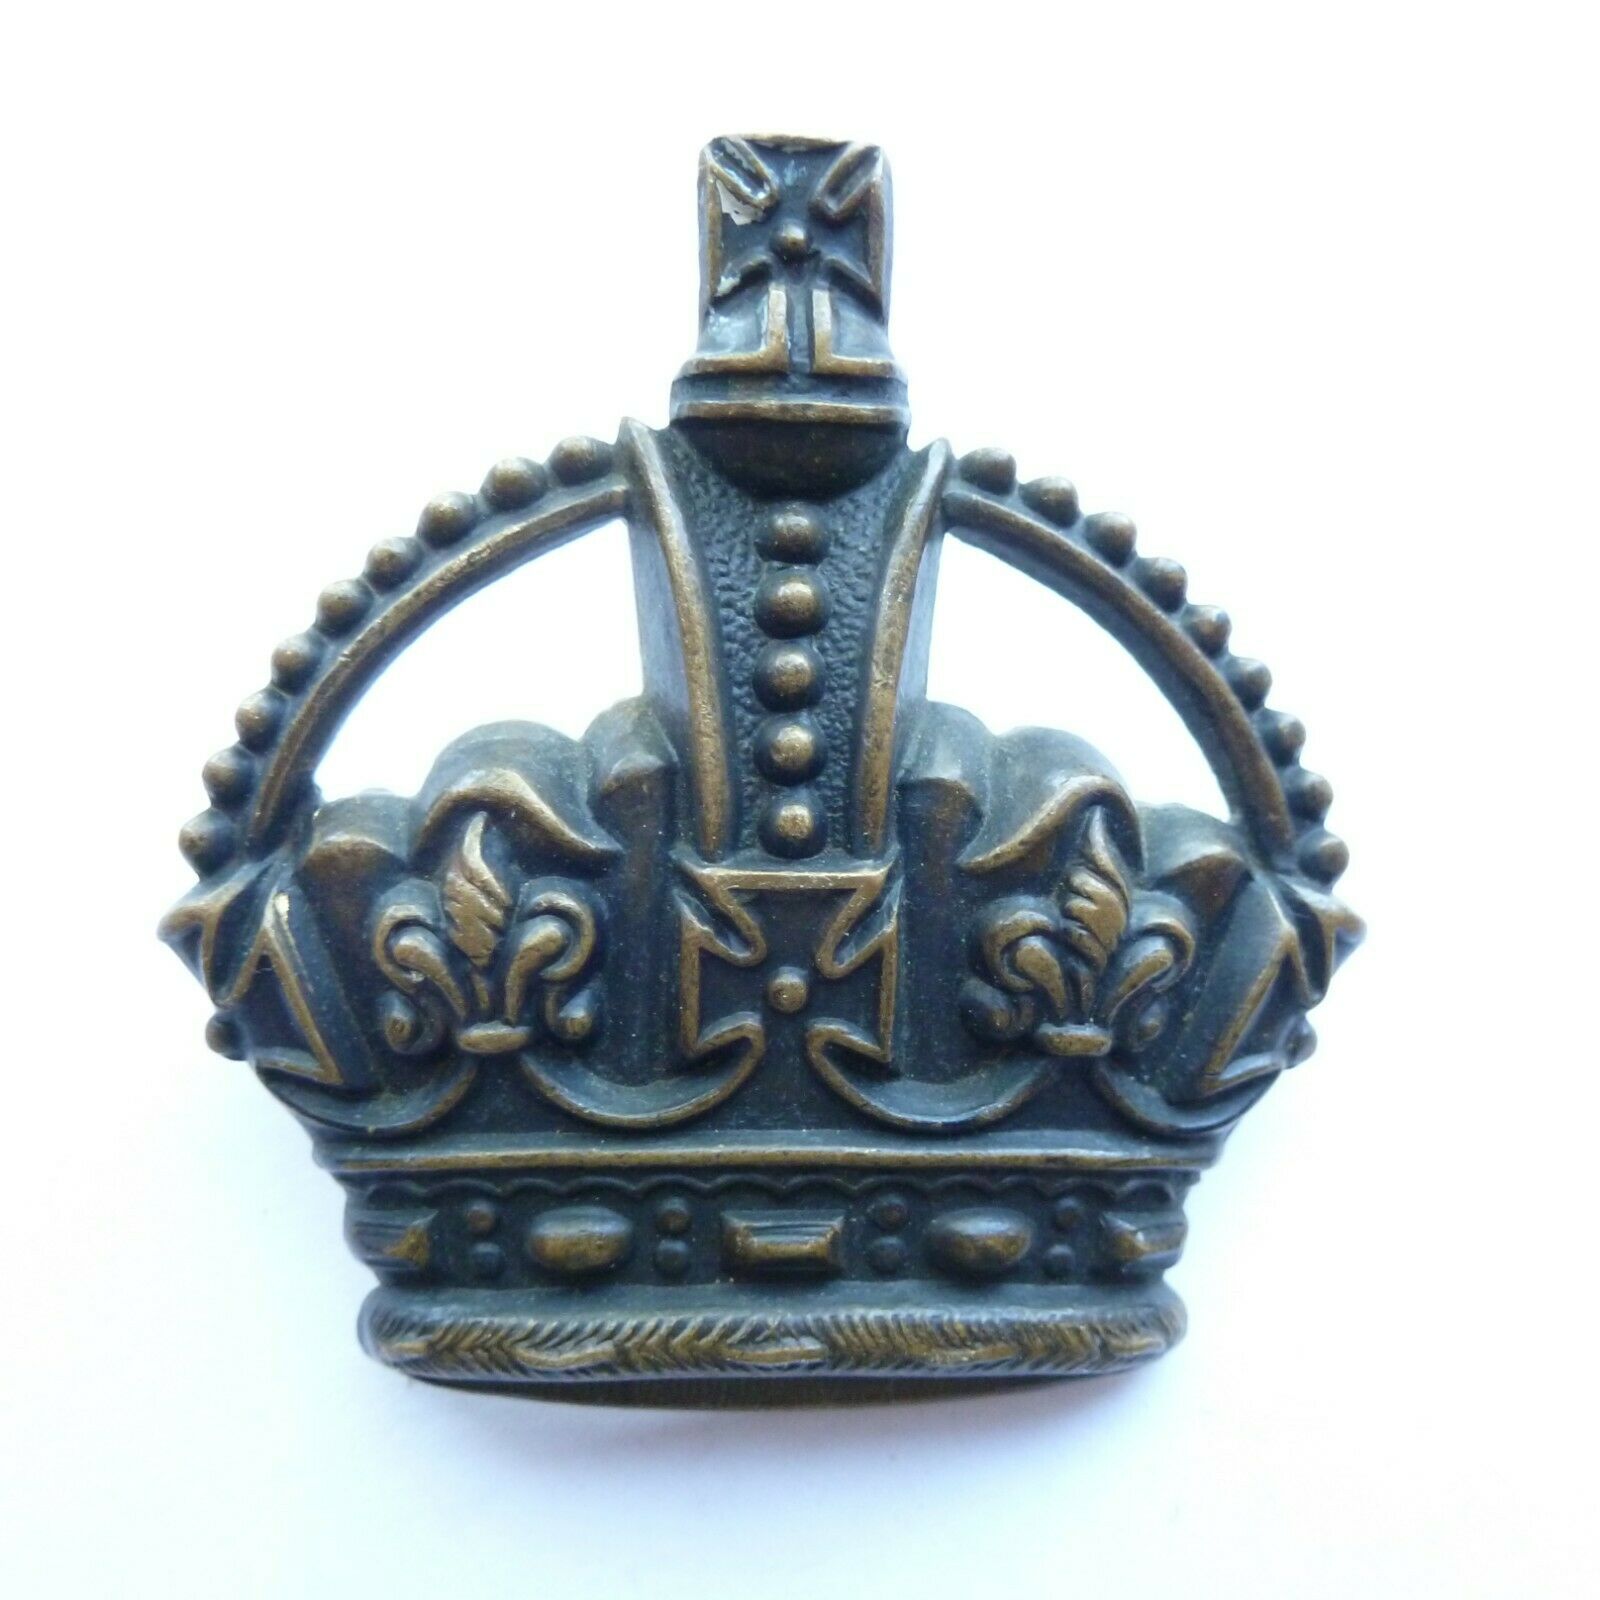 British Army Officers Insignia Crown Pips - Rank Of Major